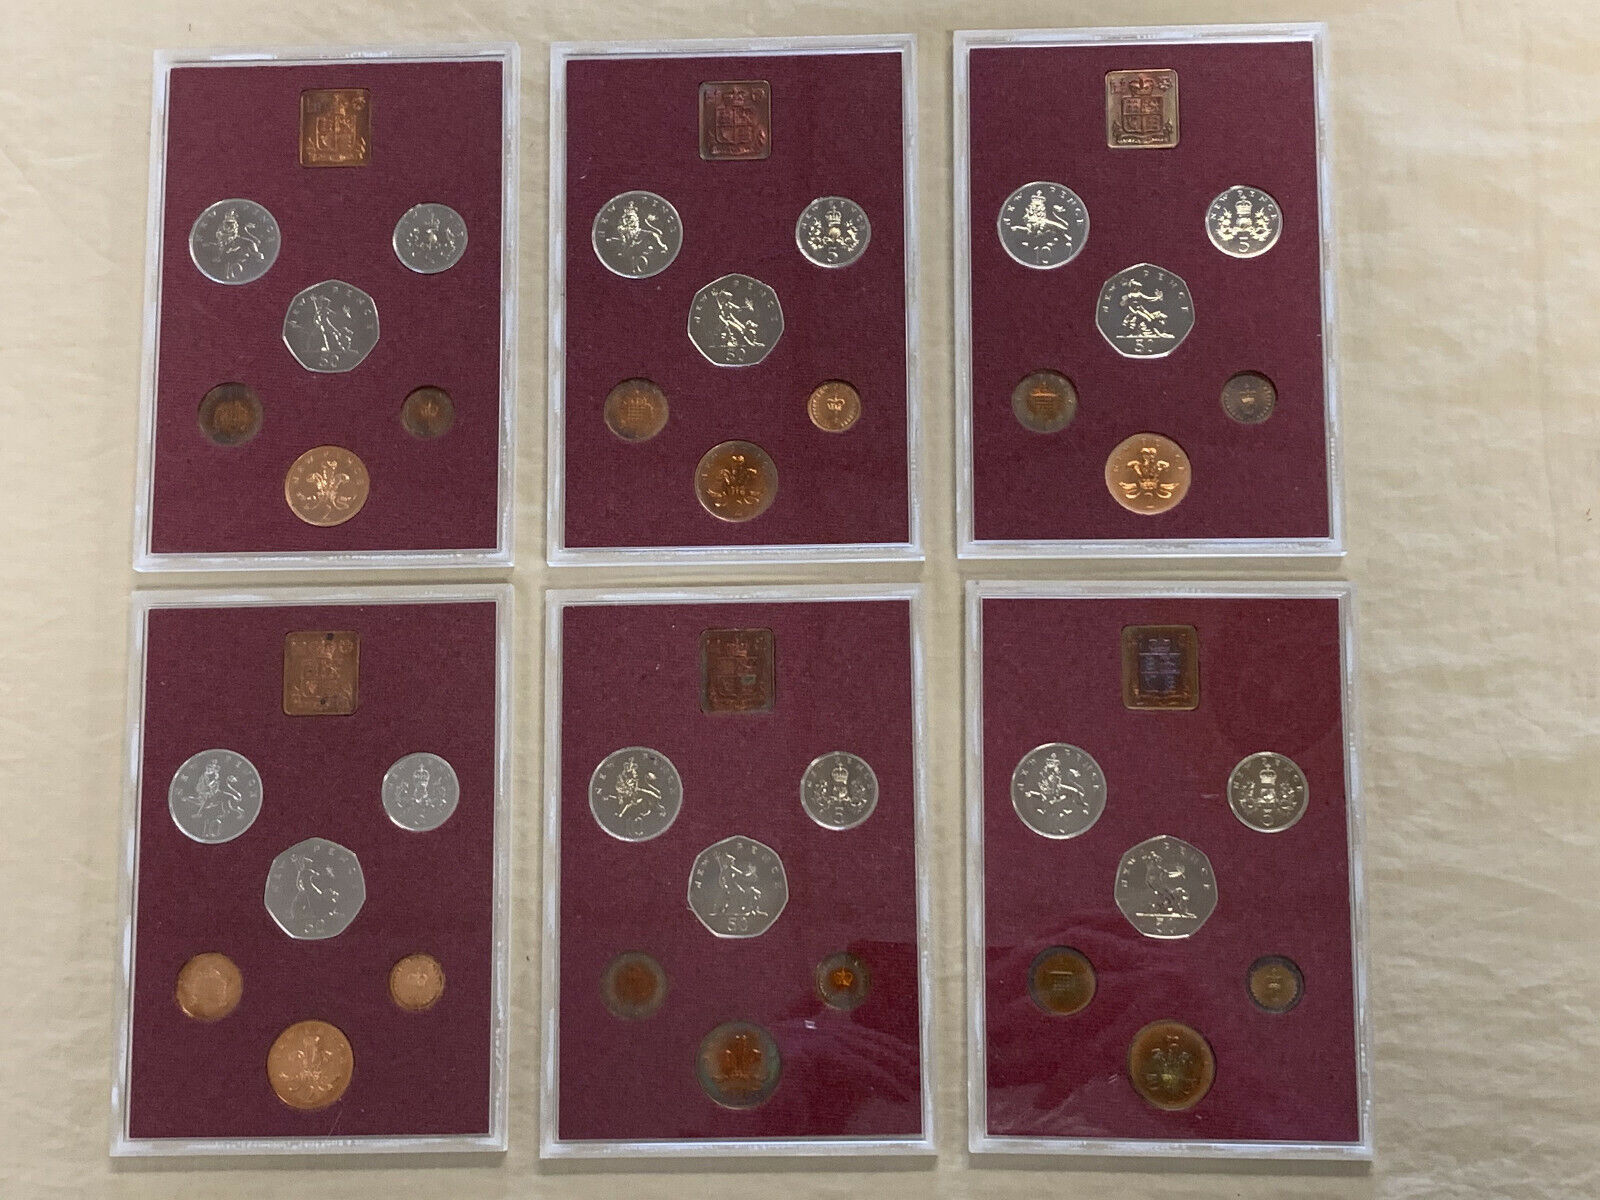 6 total 1979 UK United Kingdom 6 Coin Proof Sets in Plastic Cases - KM# PS-35 * Без бренда